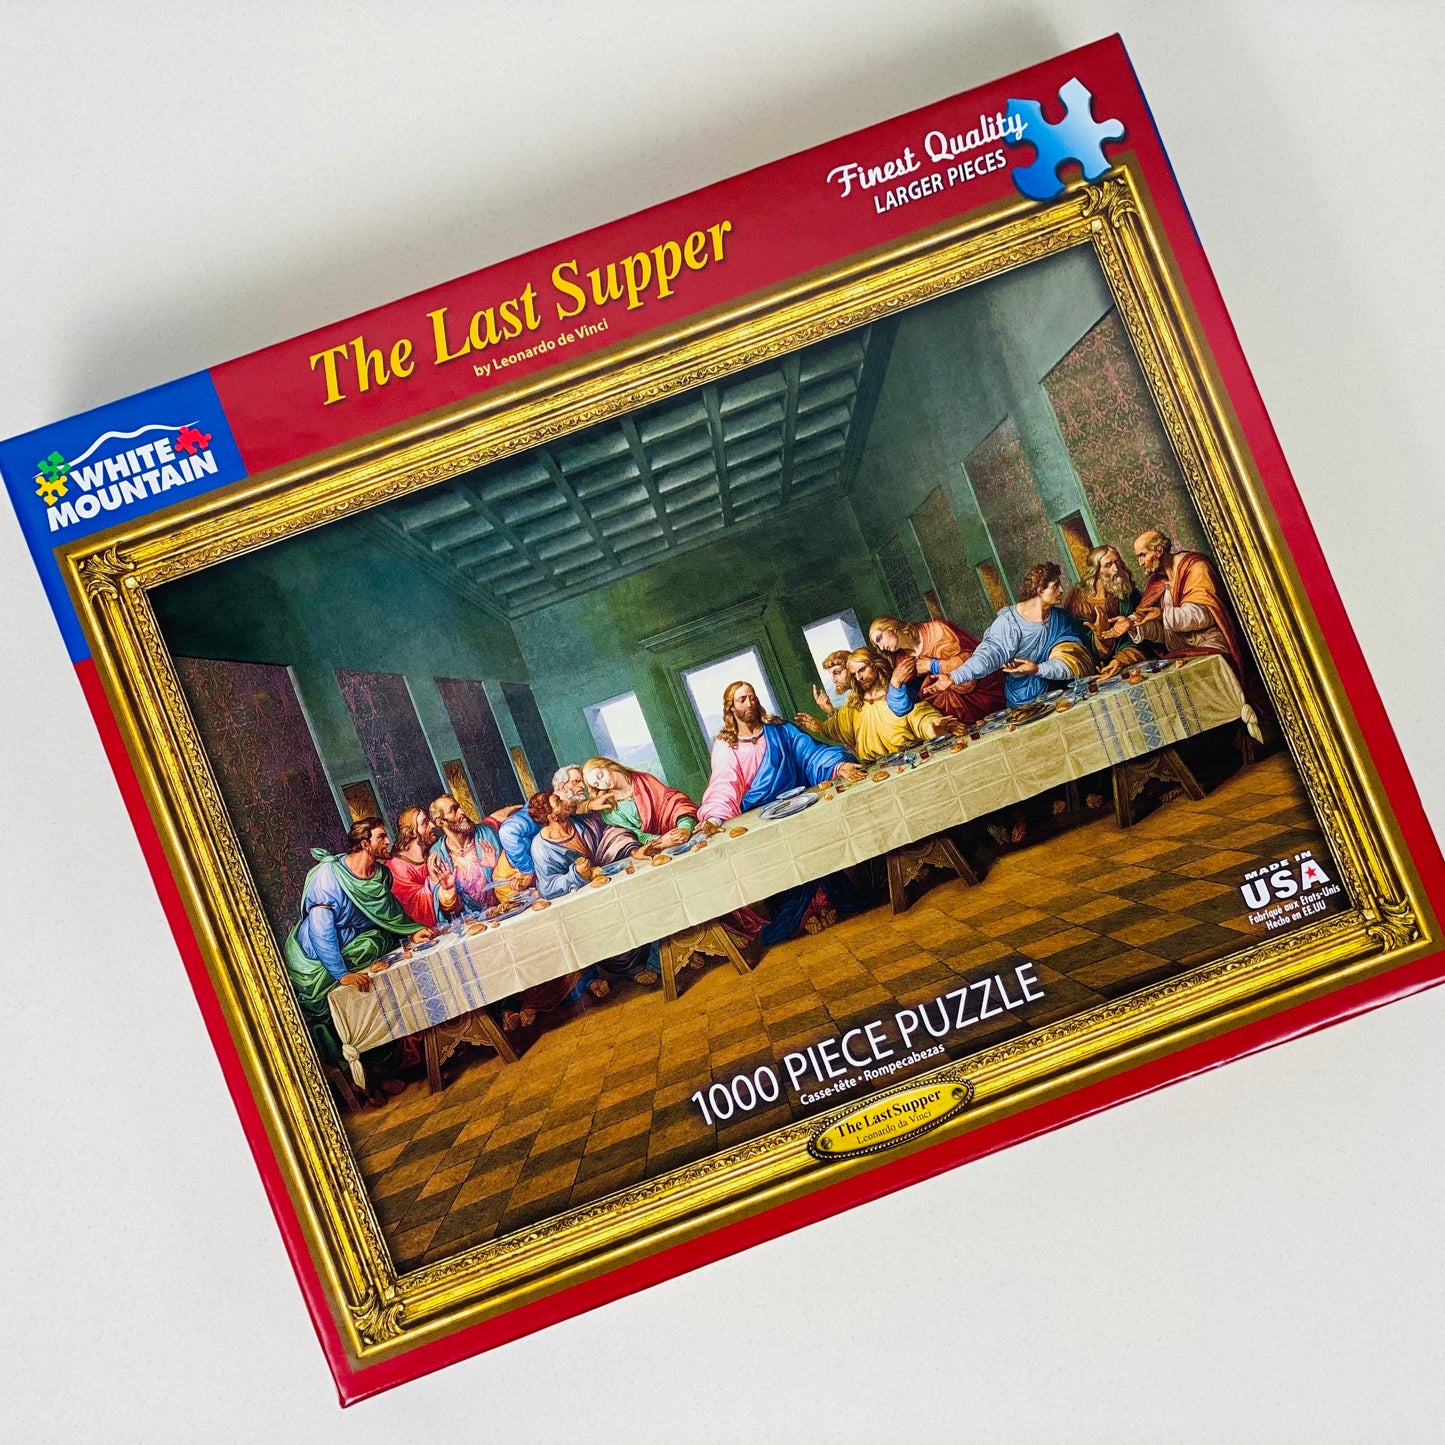 Last Supper Jigsaw Puzzle